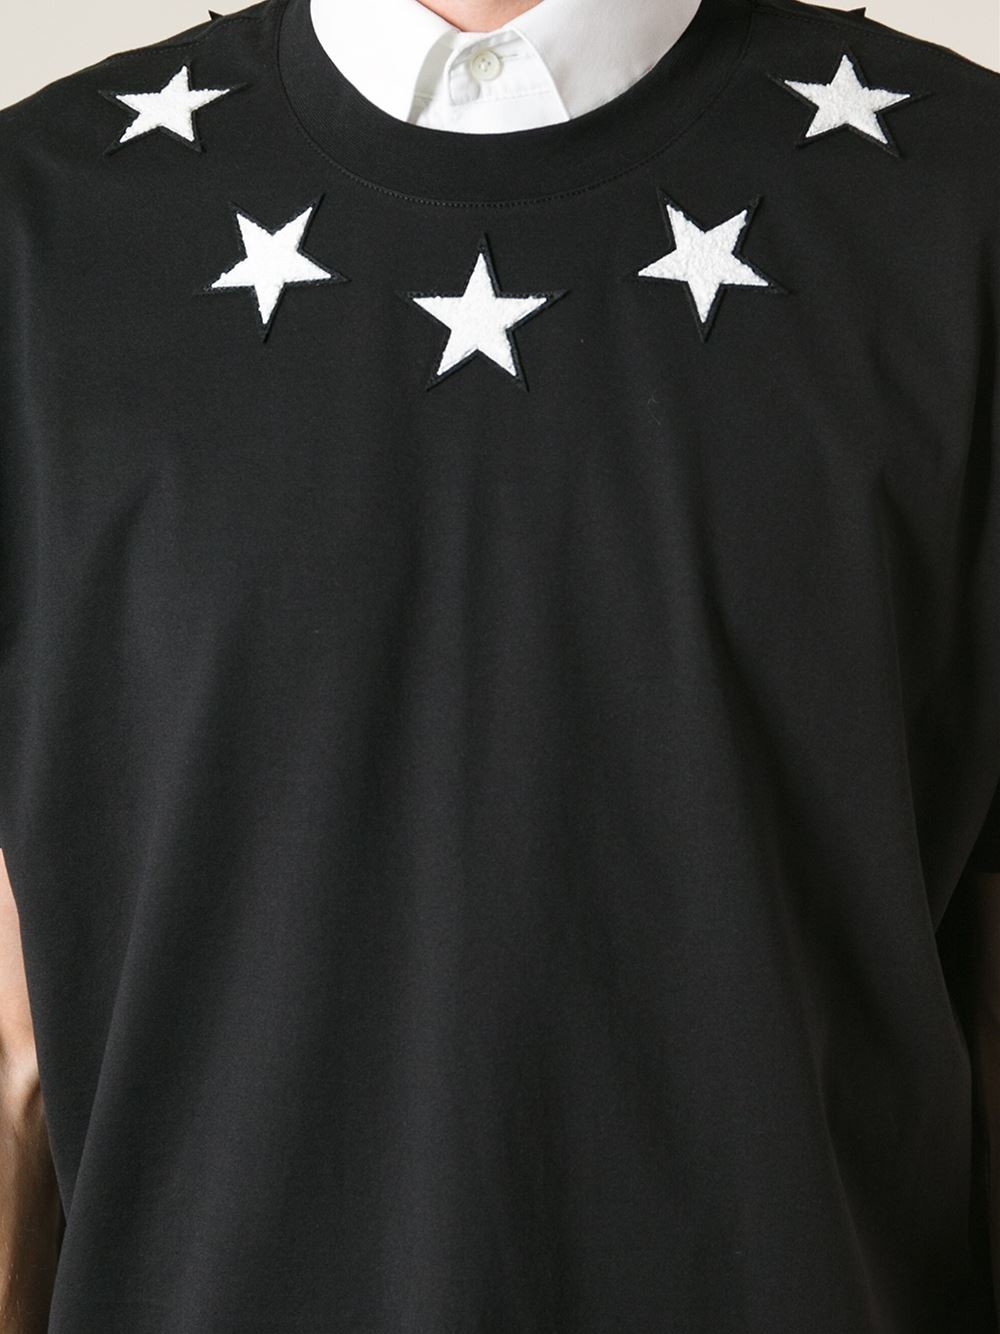 Lyst Givenchy Star Tshirt In Black For Men